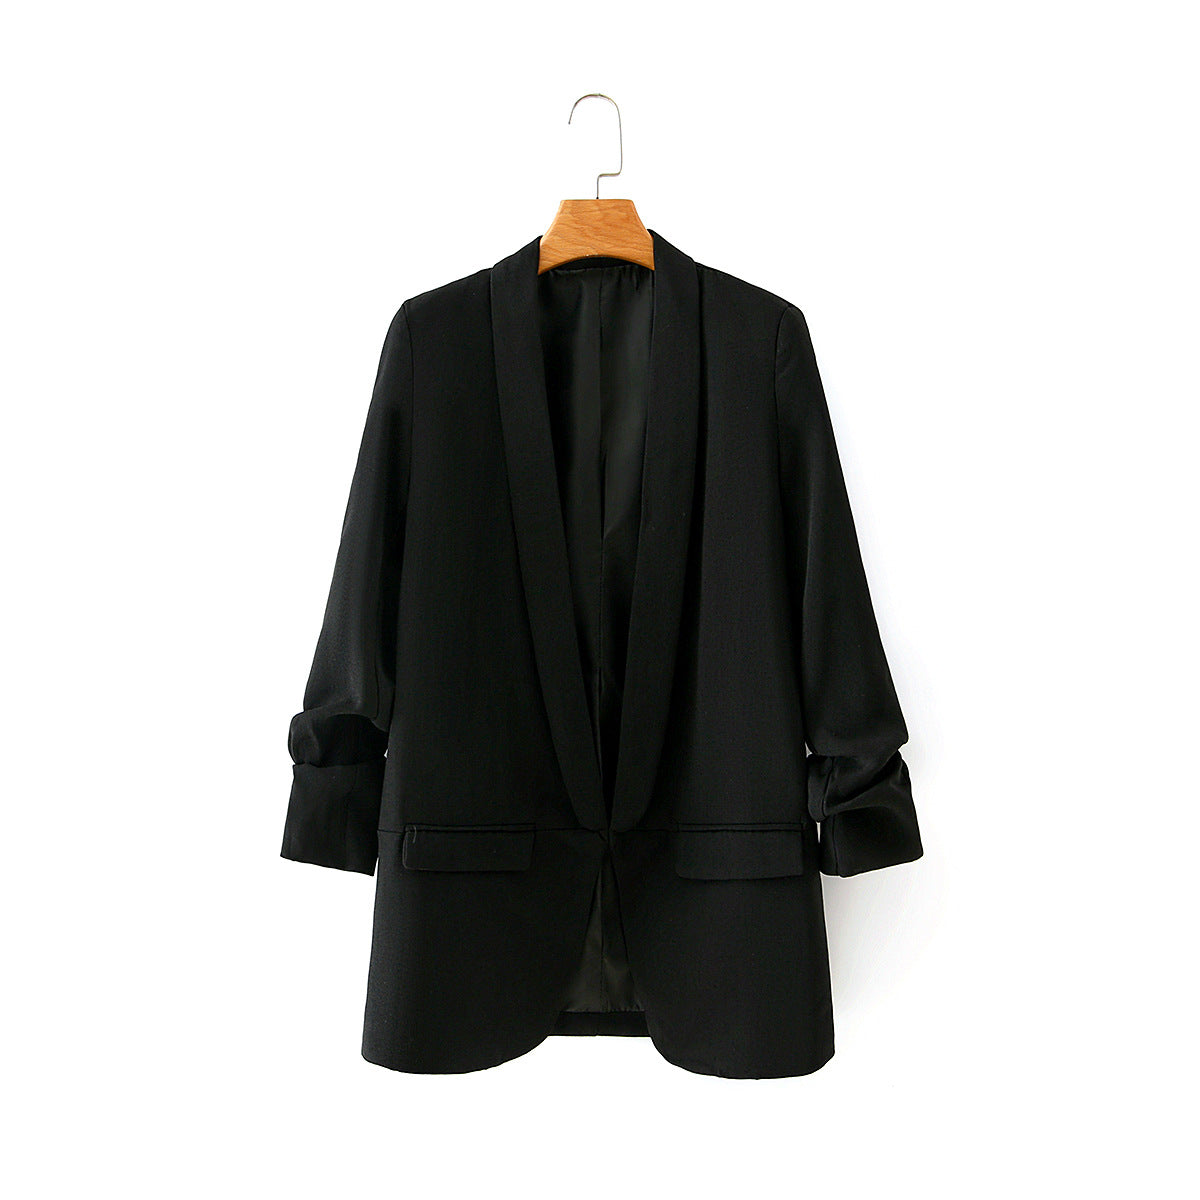 LOOSE BLACK BLAZER WITH GATHERED SLEEVES FOR WOMEN - Eugenia Molina